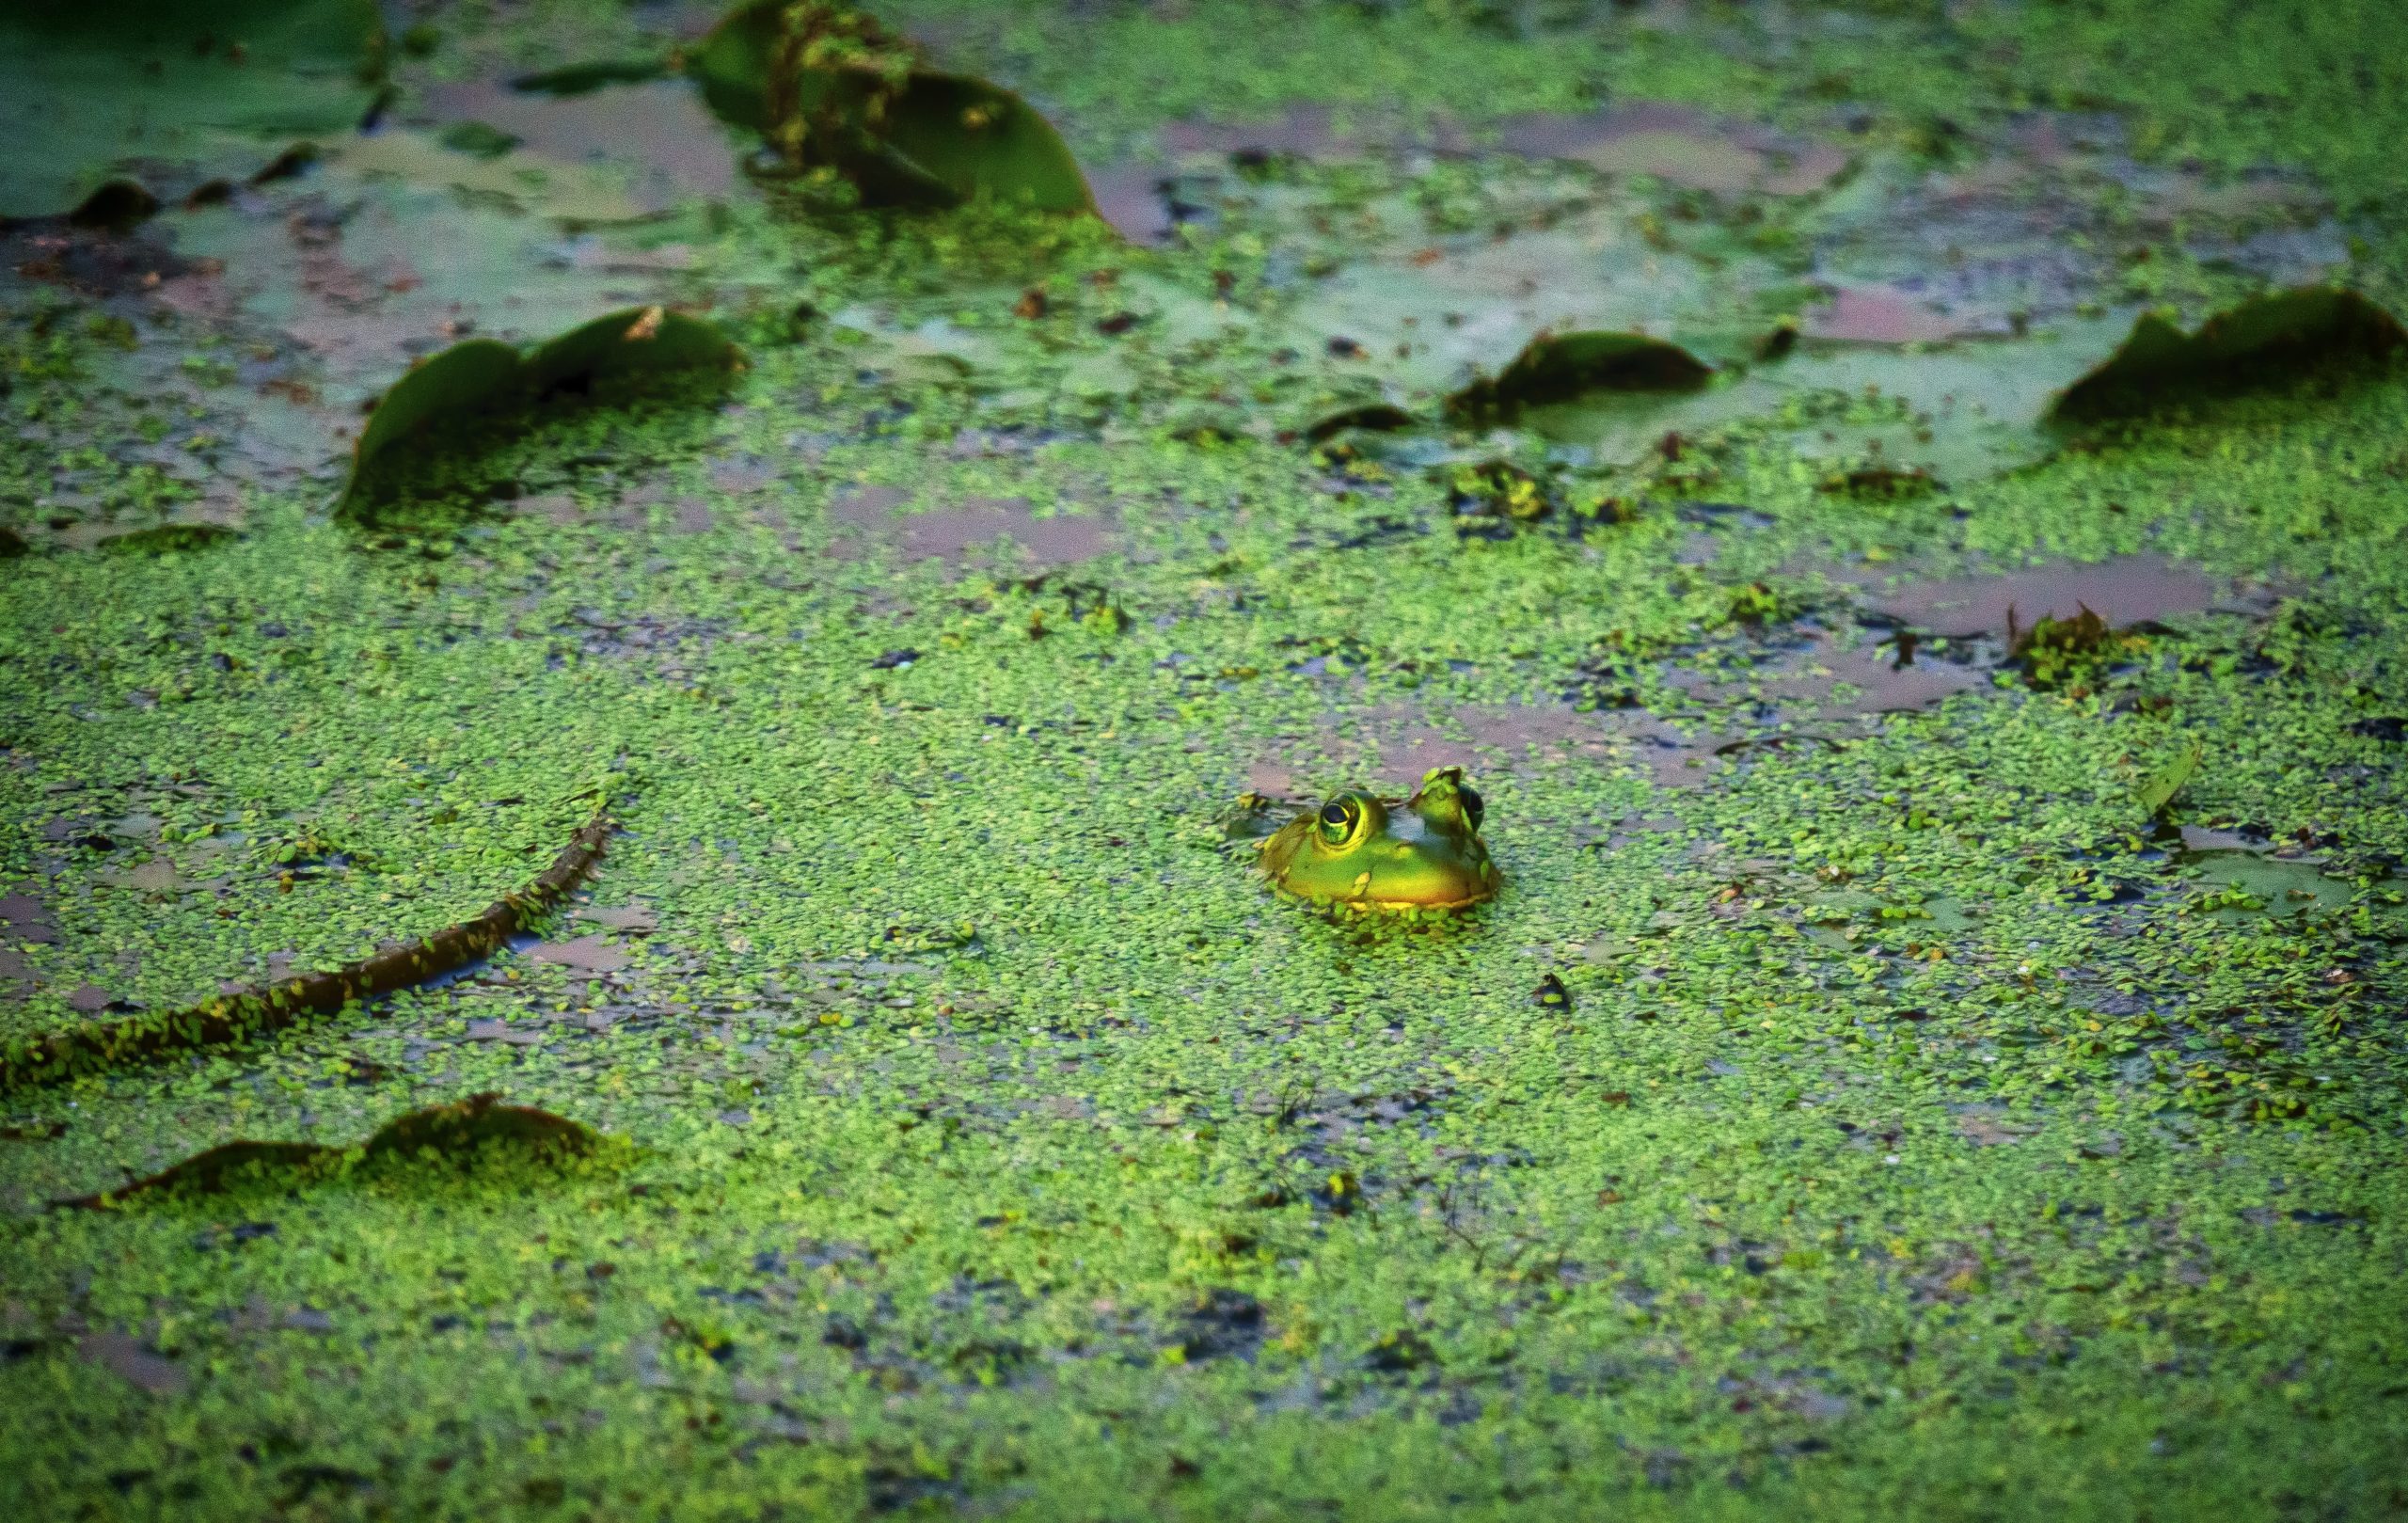 A frog pokes its head out of a mossy wetland.